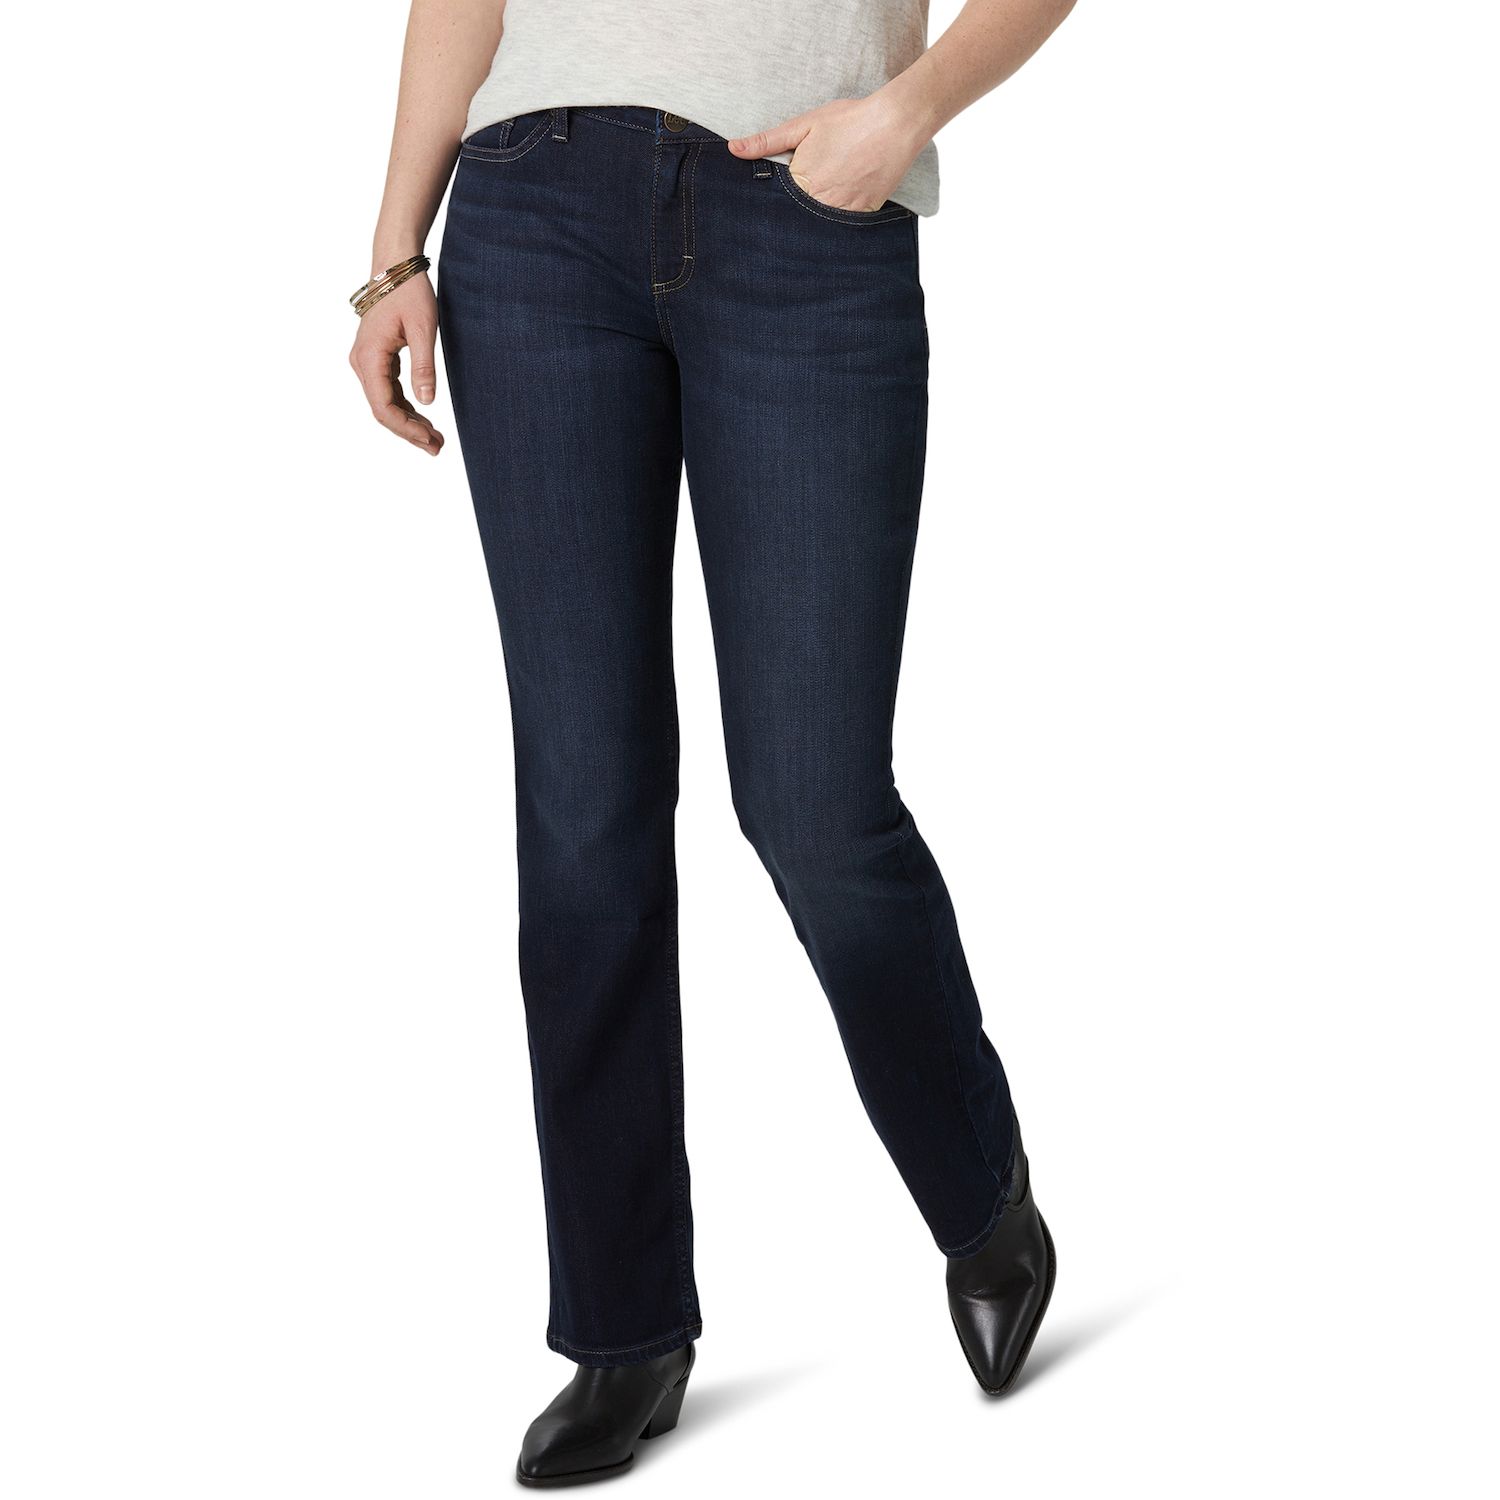 instantly slim jeans